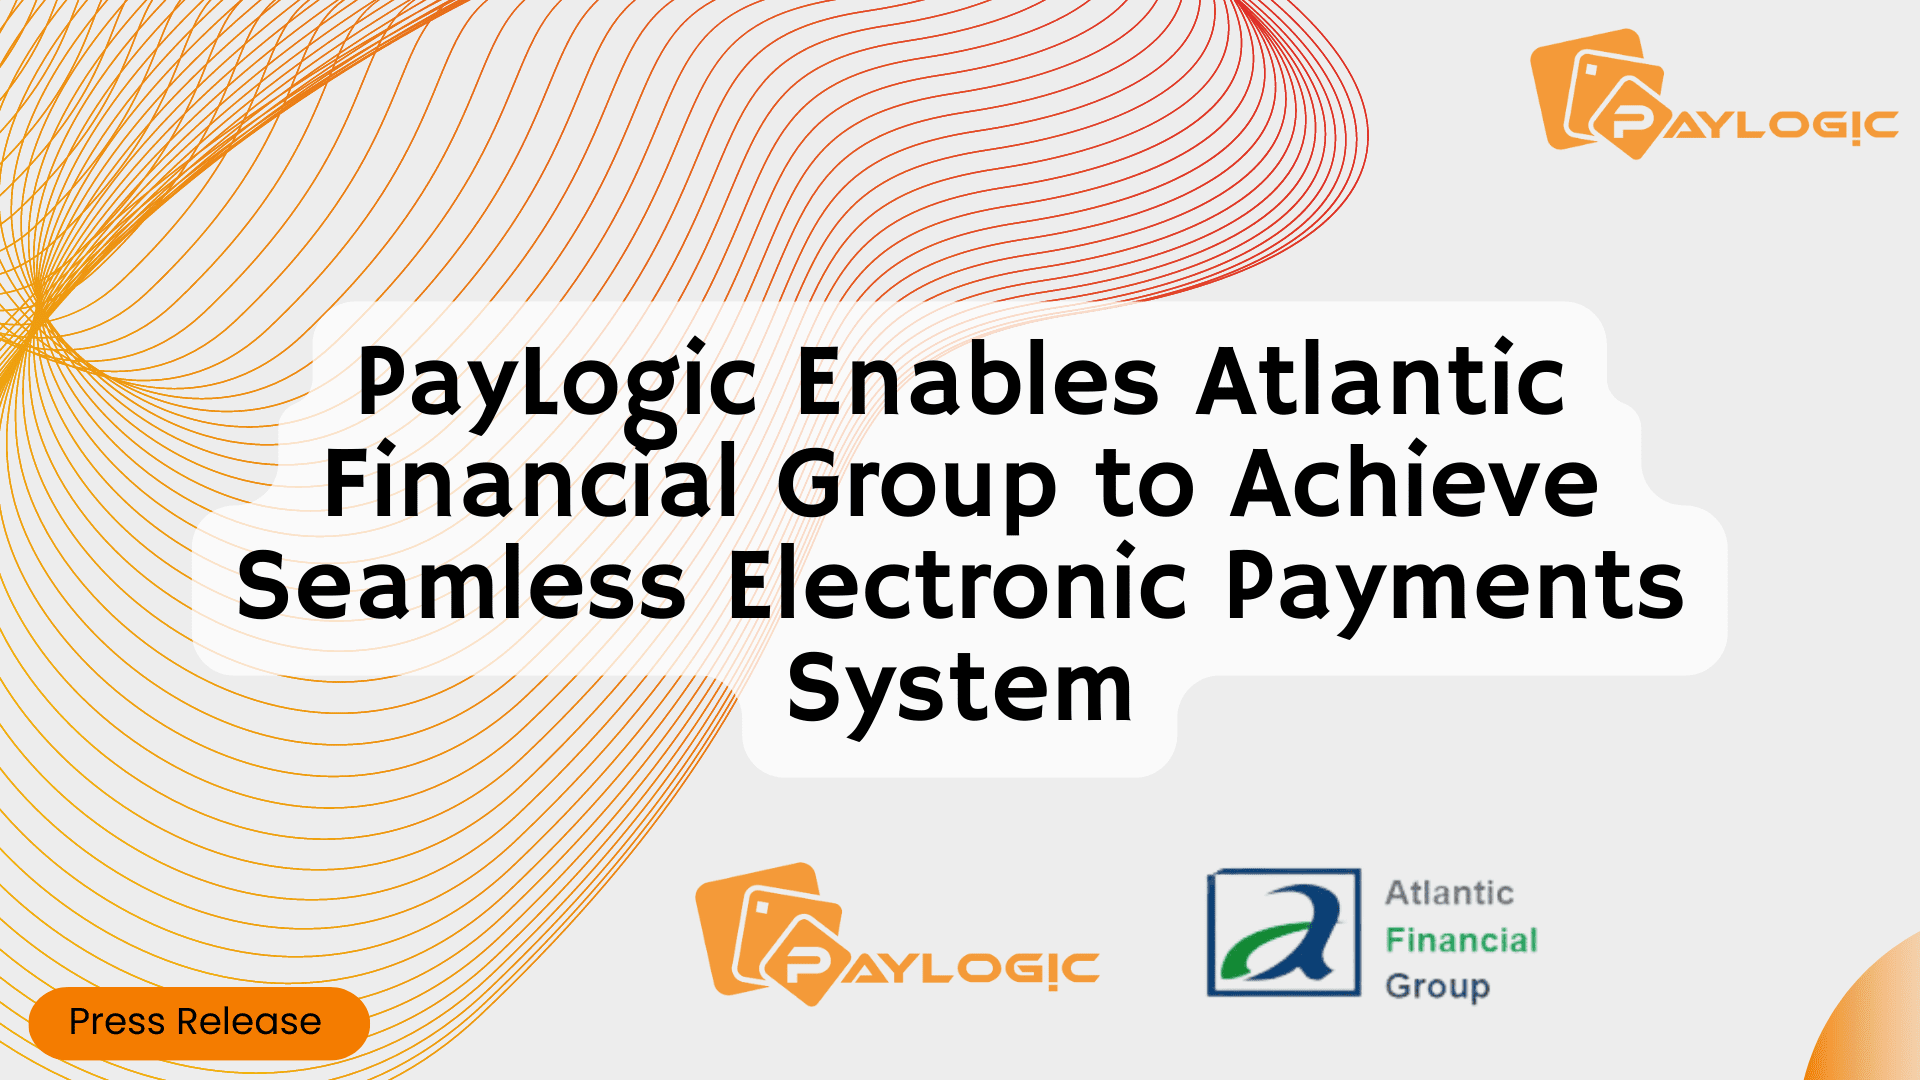 PayLogic Enables Atlantic Financial Group to Achieve Seamless Electronic Payments System